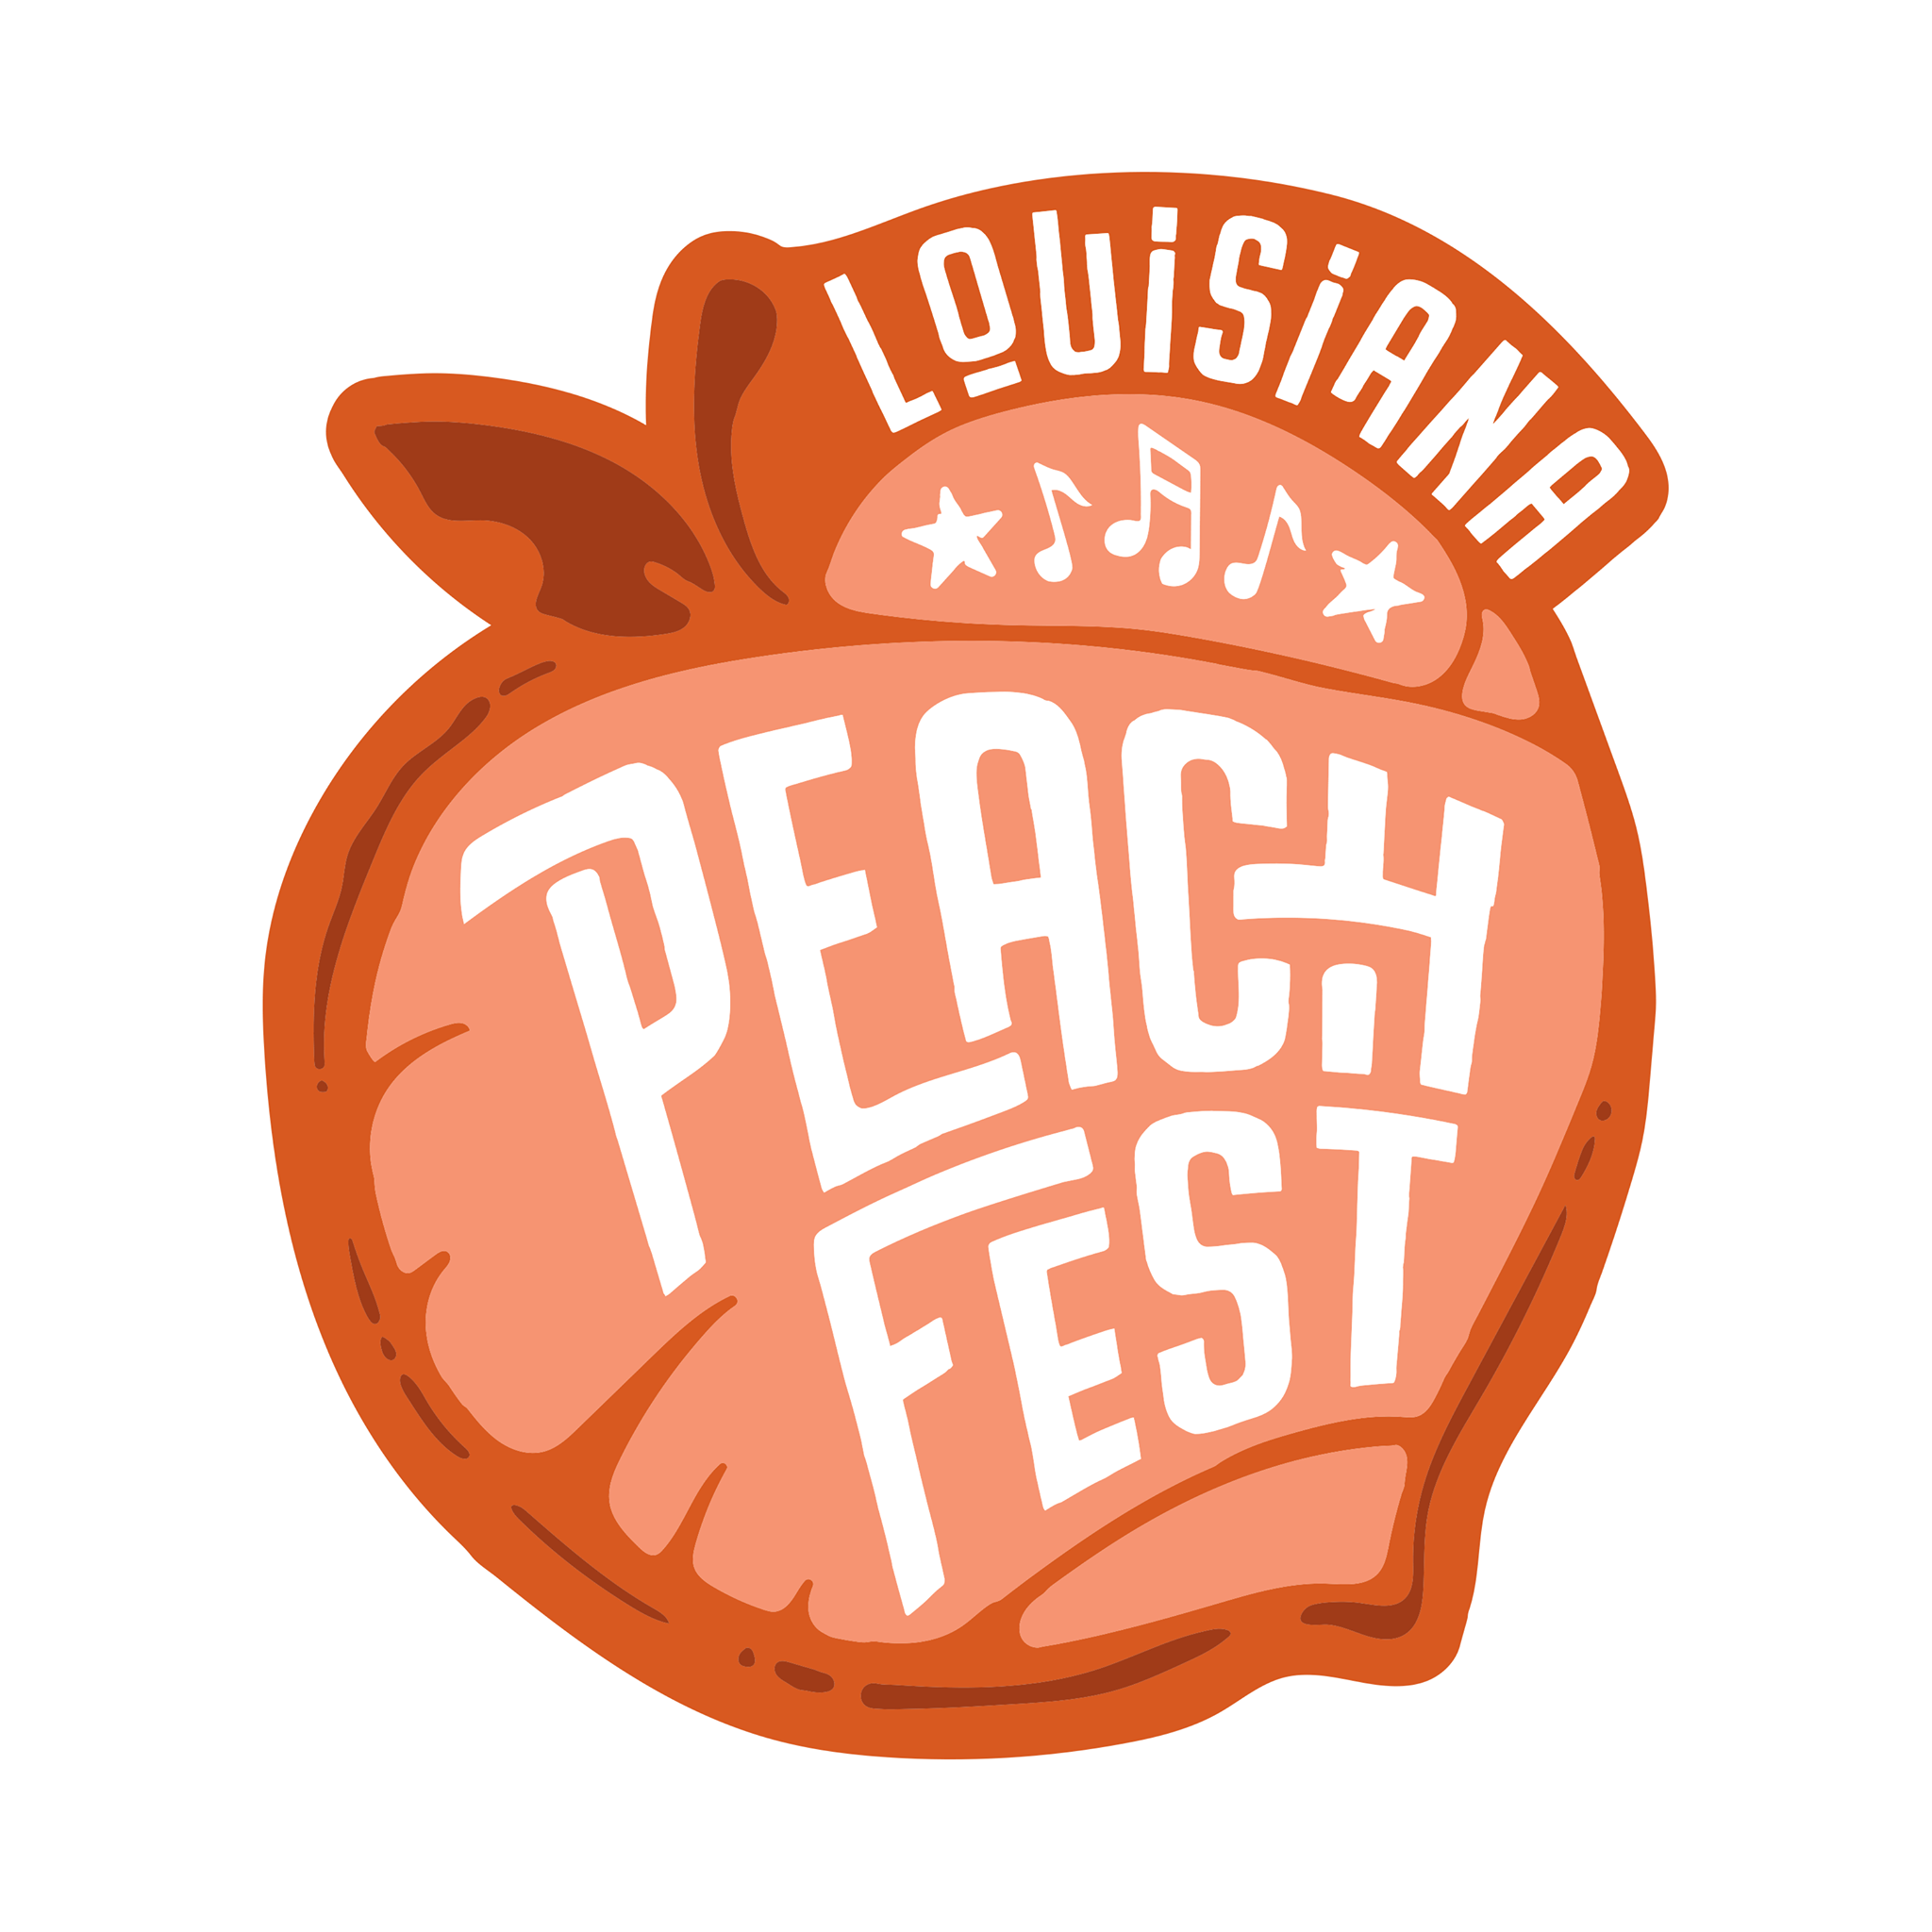 Louisiana Peach Fest is THIS Weekend in Ruston!